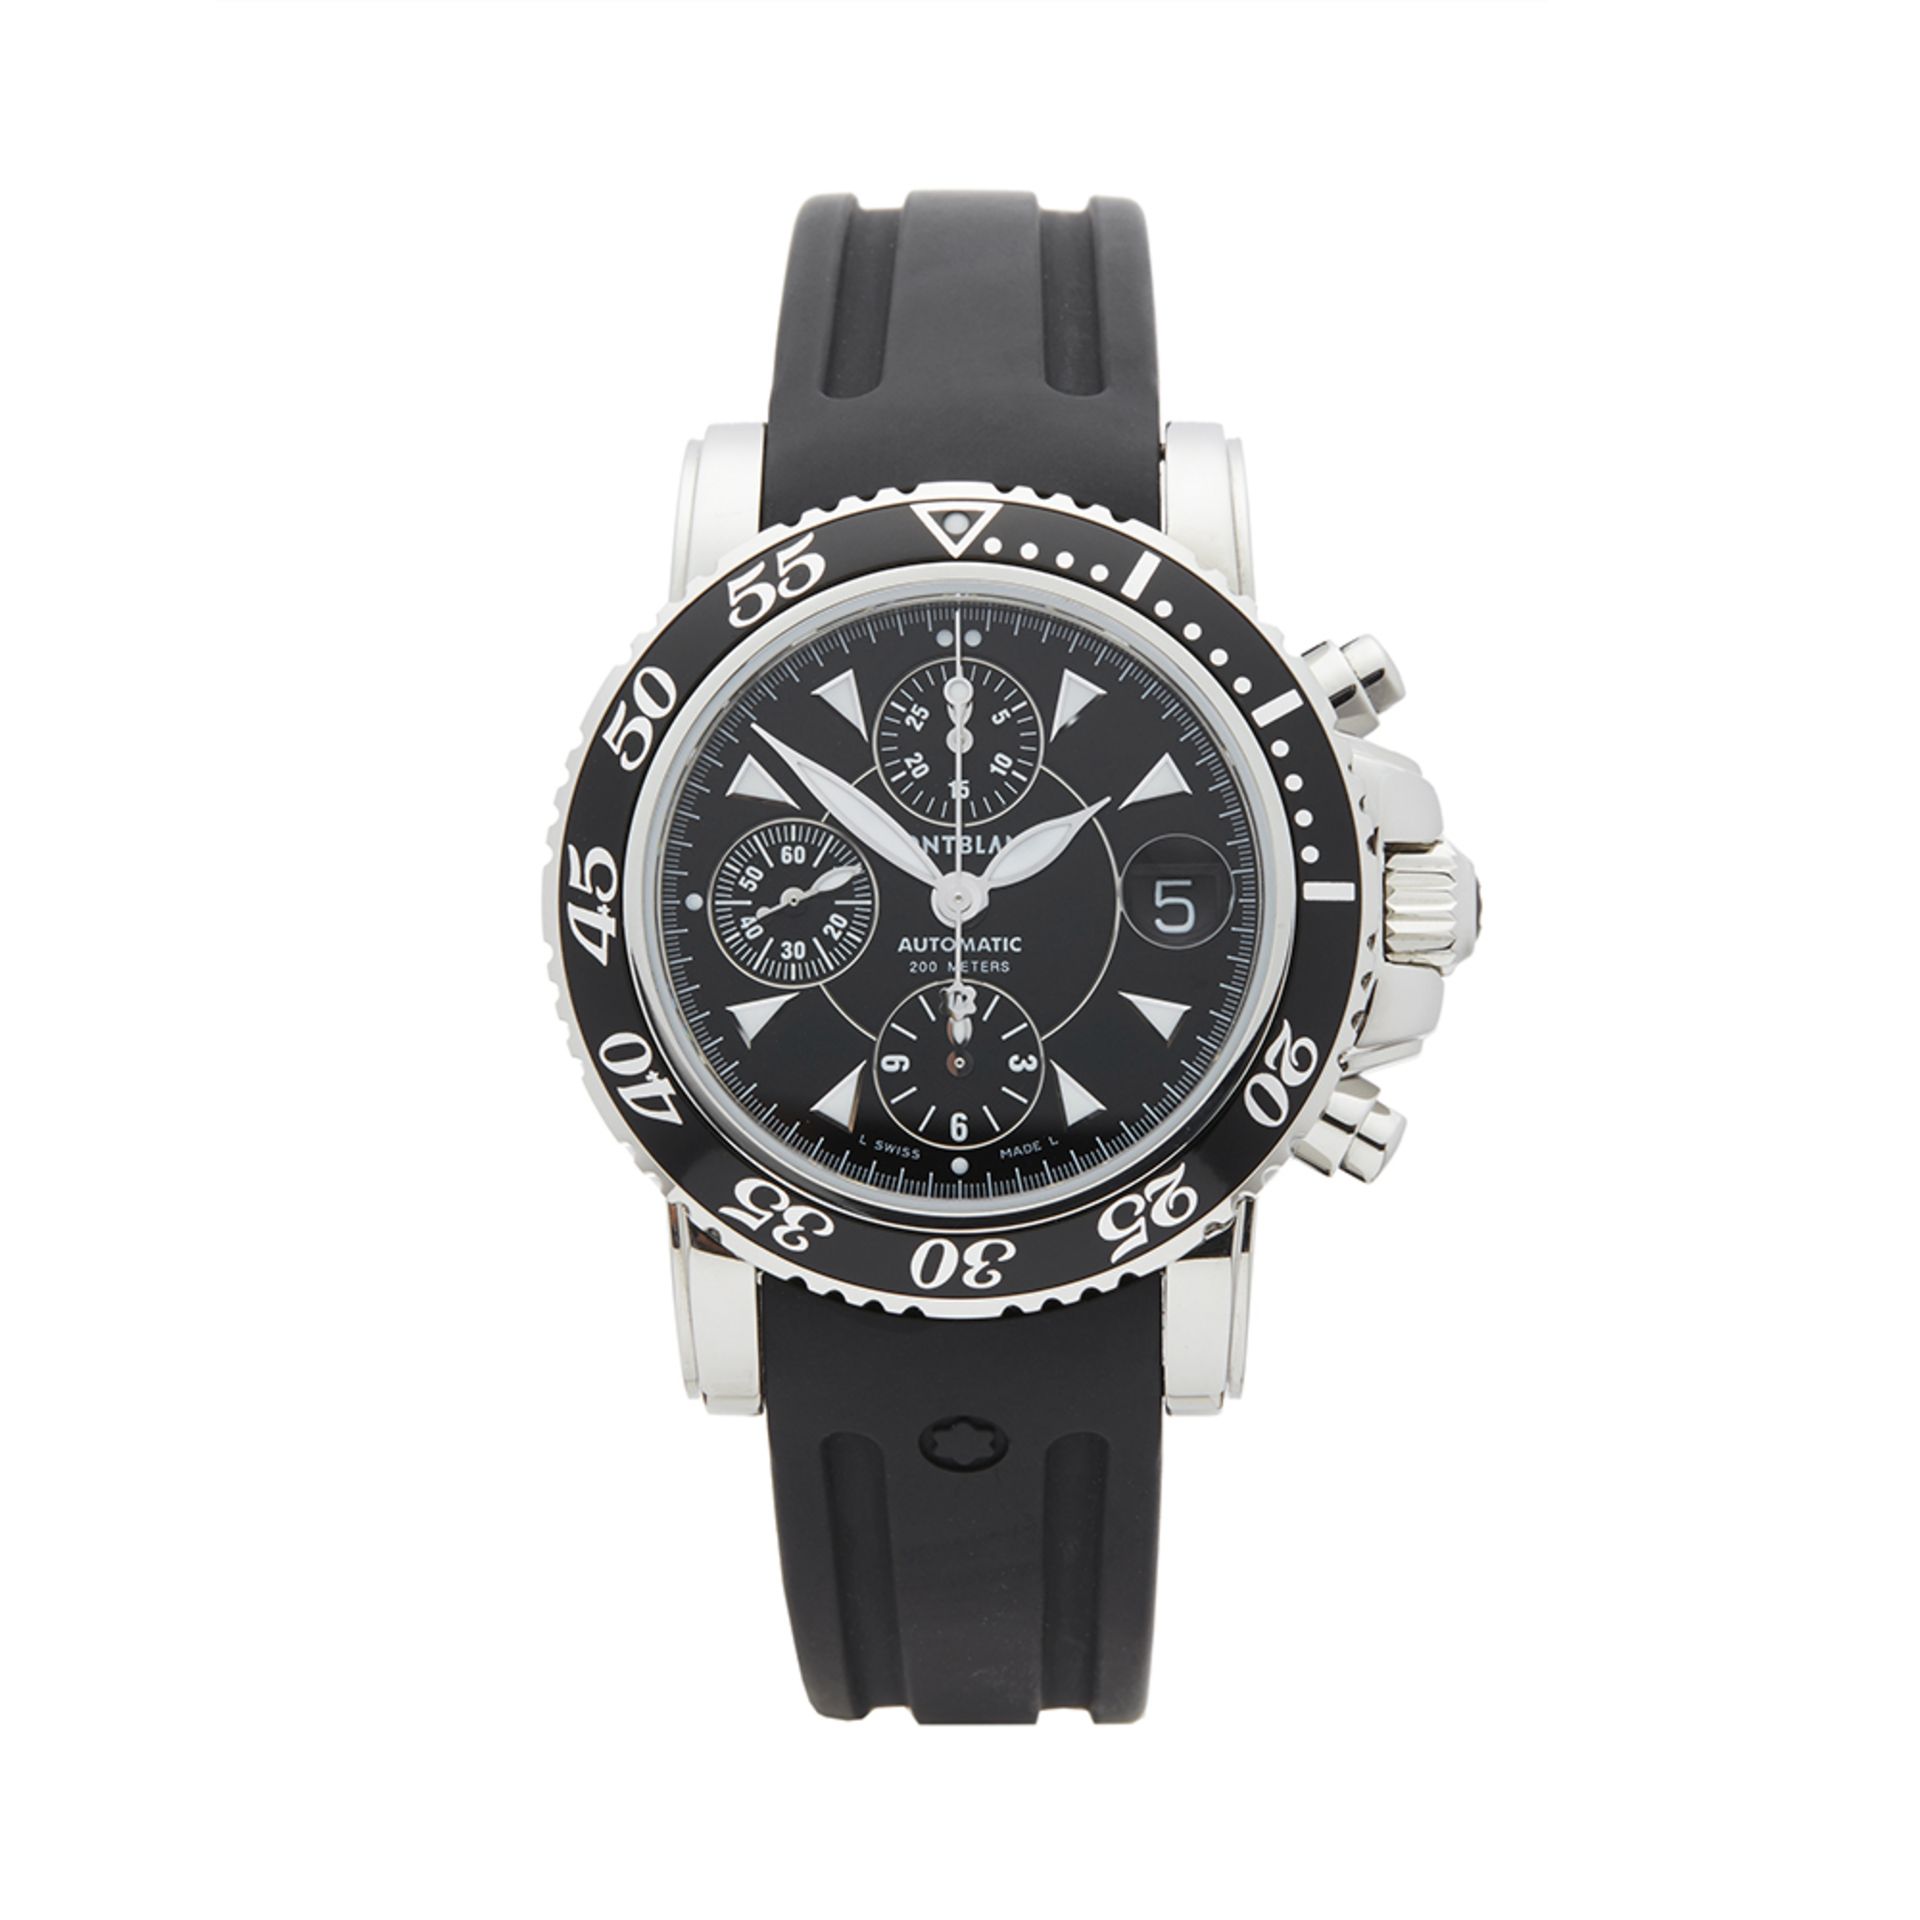 Montblanc Sport Chronograph 41mm Stainless Steel - 3274 - Image 2 of 8